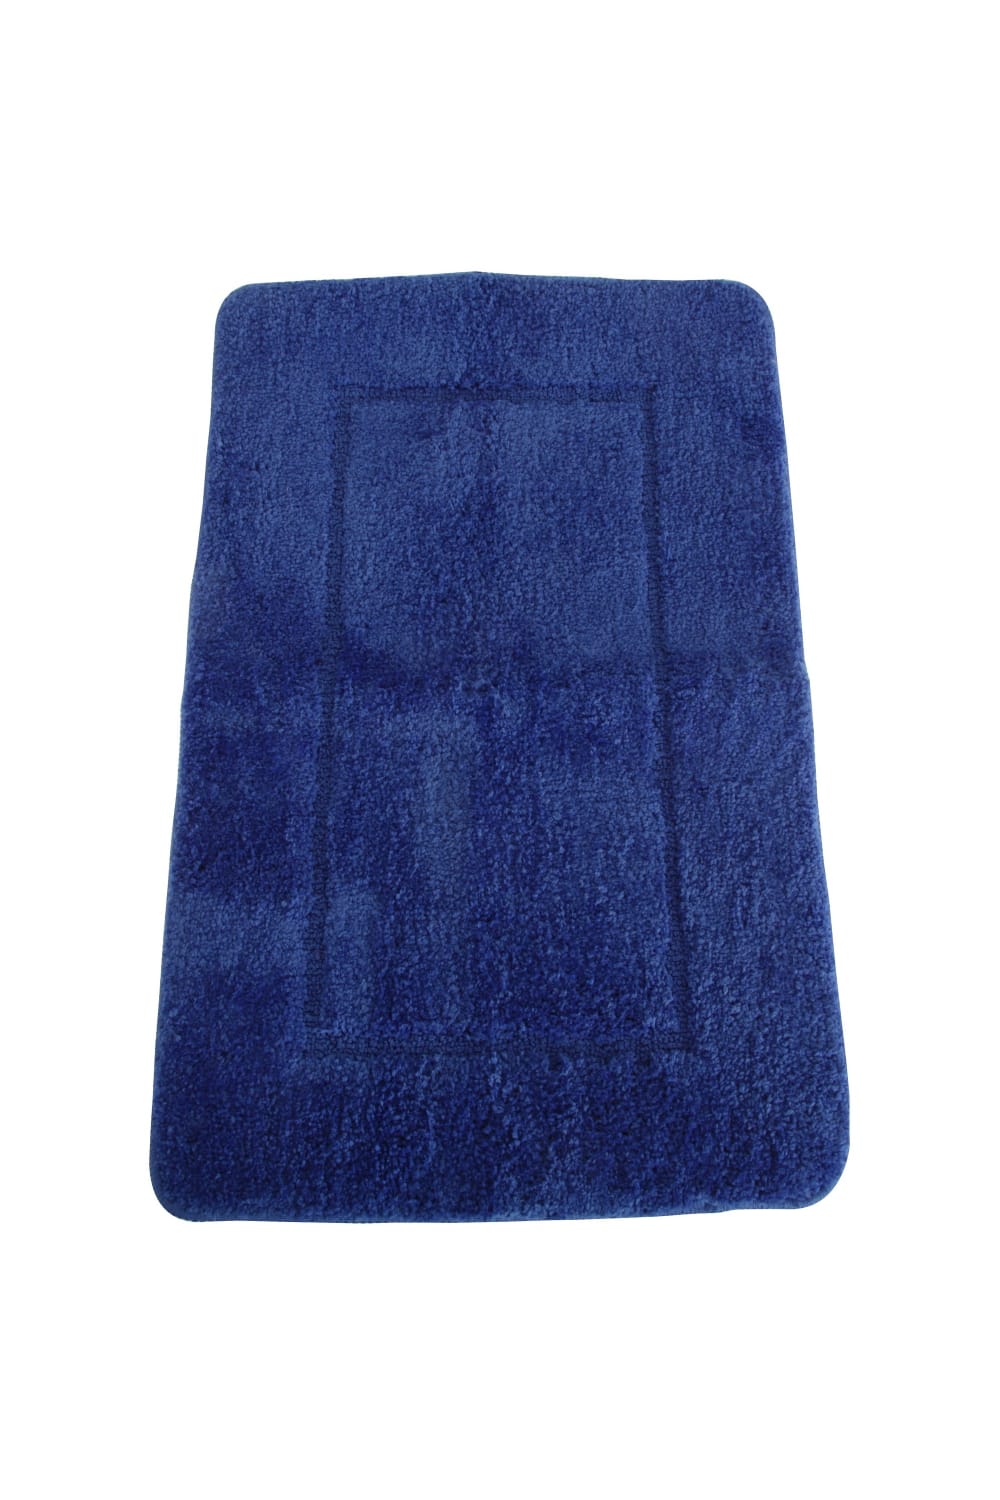 Mayfair Cashmere Touch Ultimate Microfiber Bath Mat (Royal) (19.6 x 31.4in)